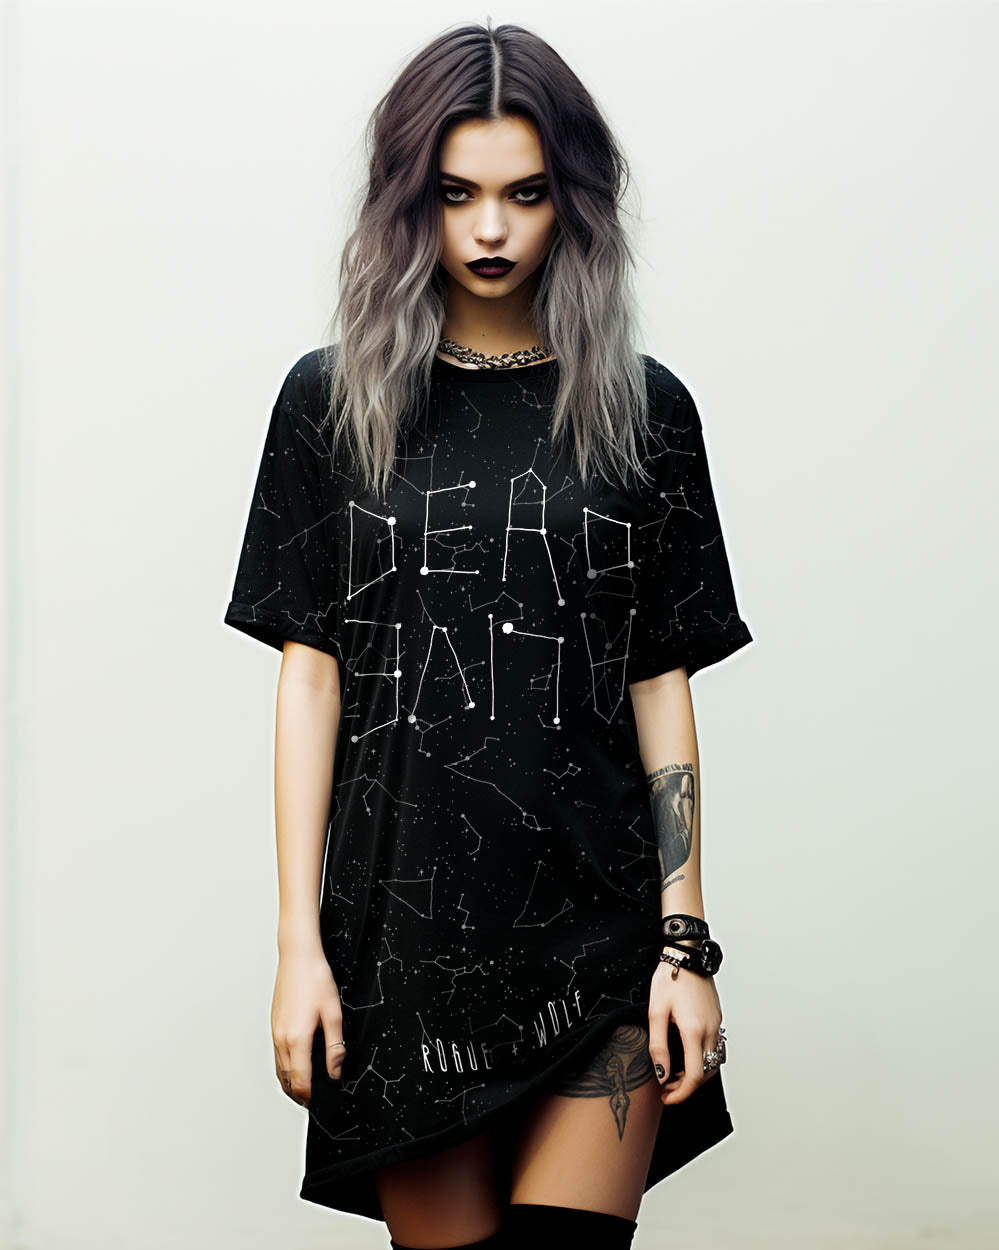 Rogue + Wolf Harajuku Goth Clothes Alt Clothing Gothic Tshirt for Women Emo  Halloween Dress Aesthetic Black at  Women's Clothing store